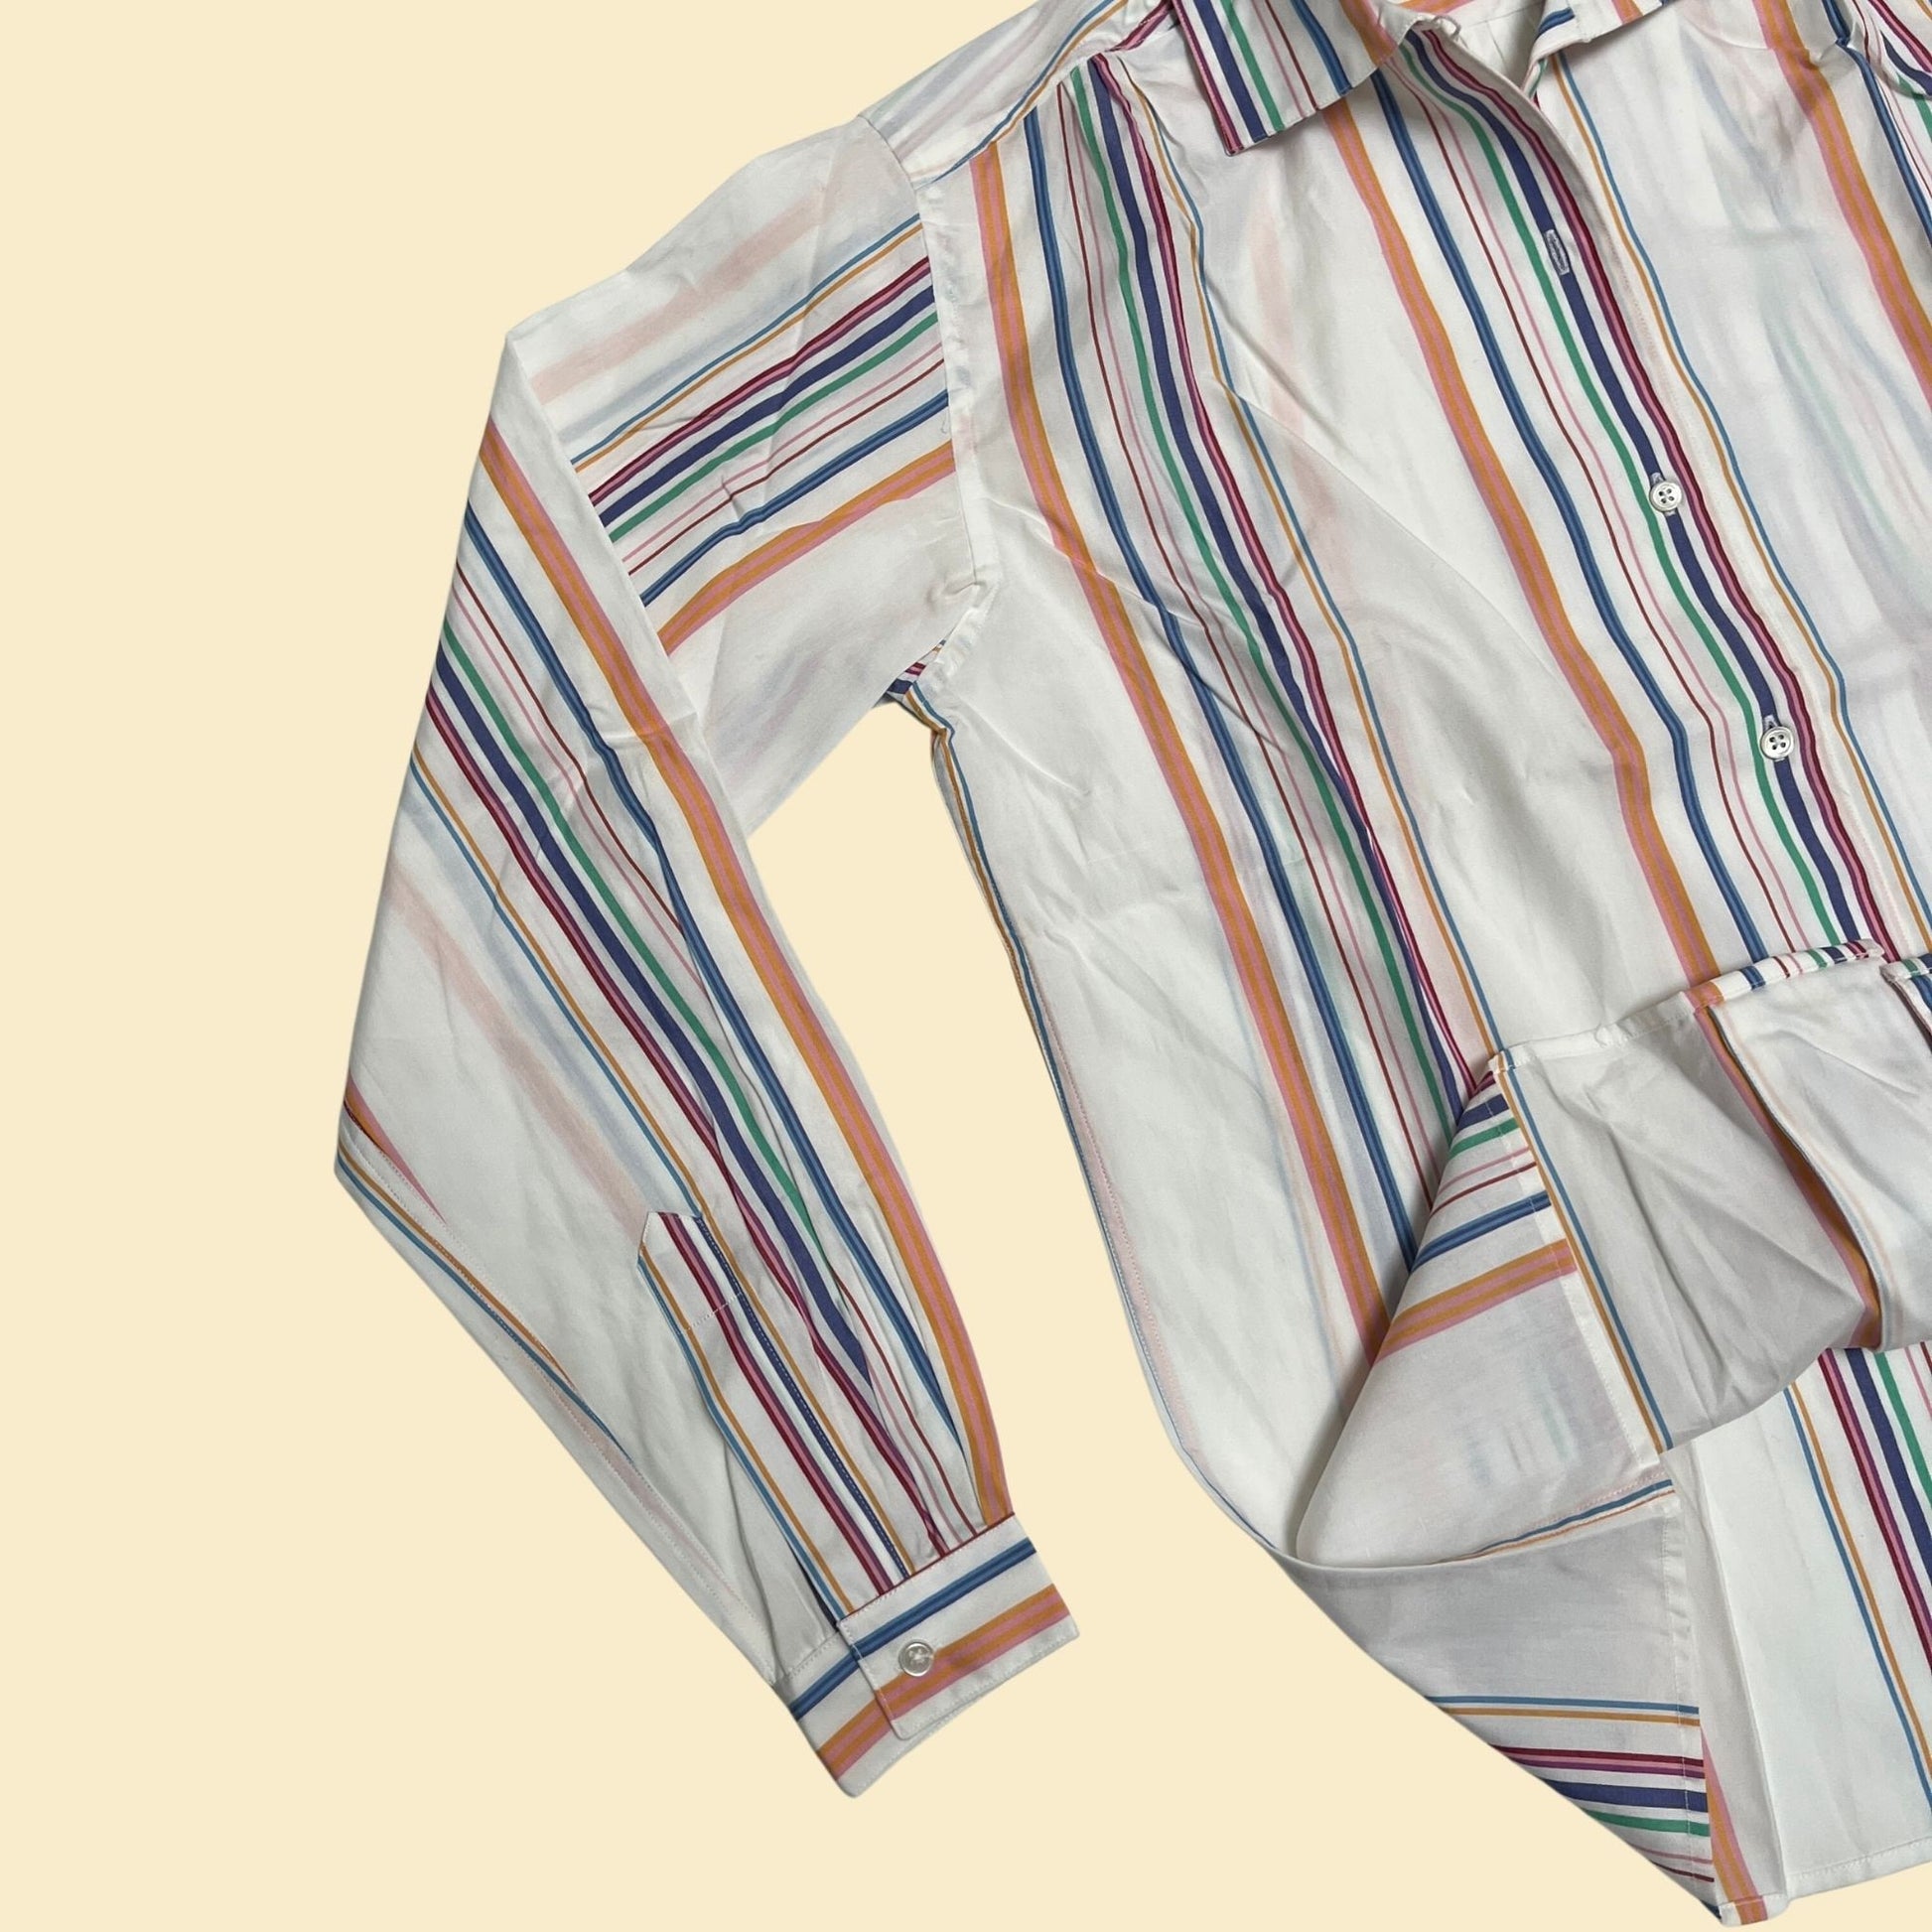 80s Alexander Julian women's blouse, vintage striped 1980s button down shirt in orange, white, purple, teal and pink